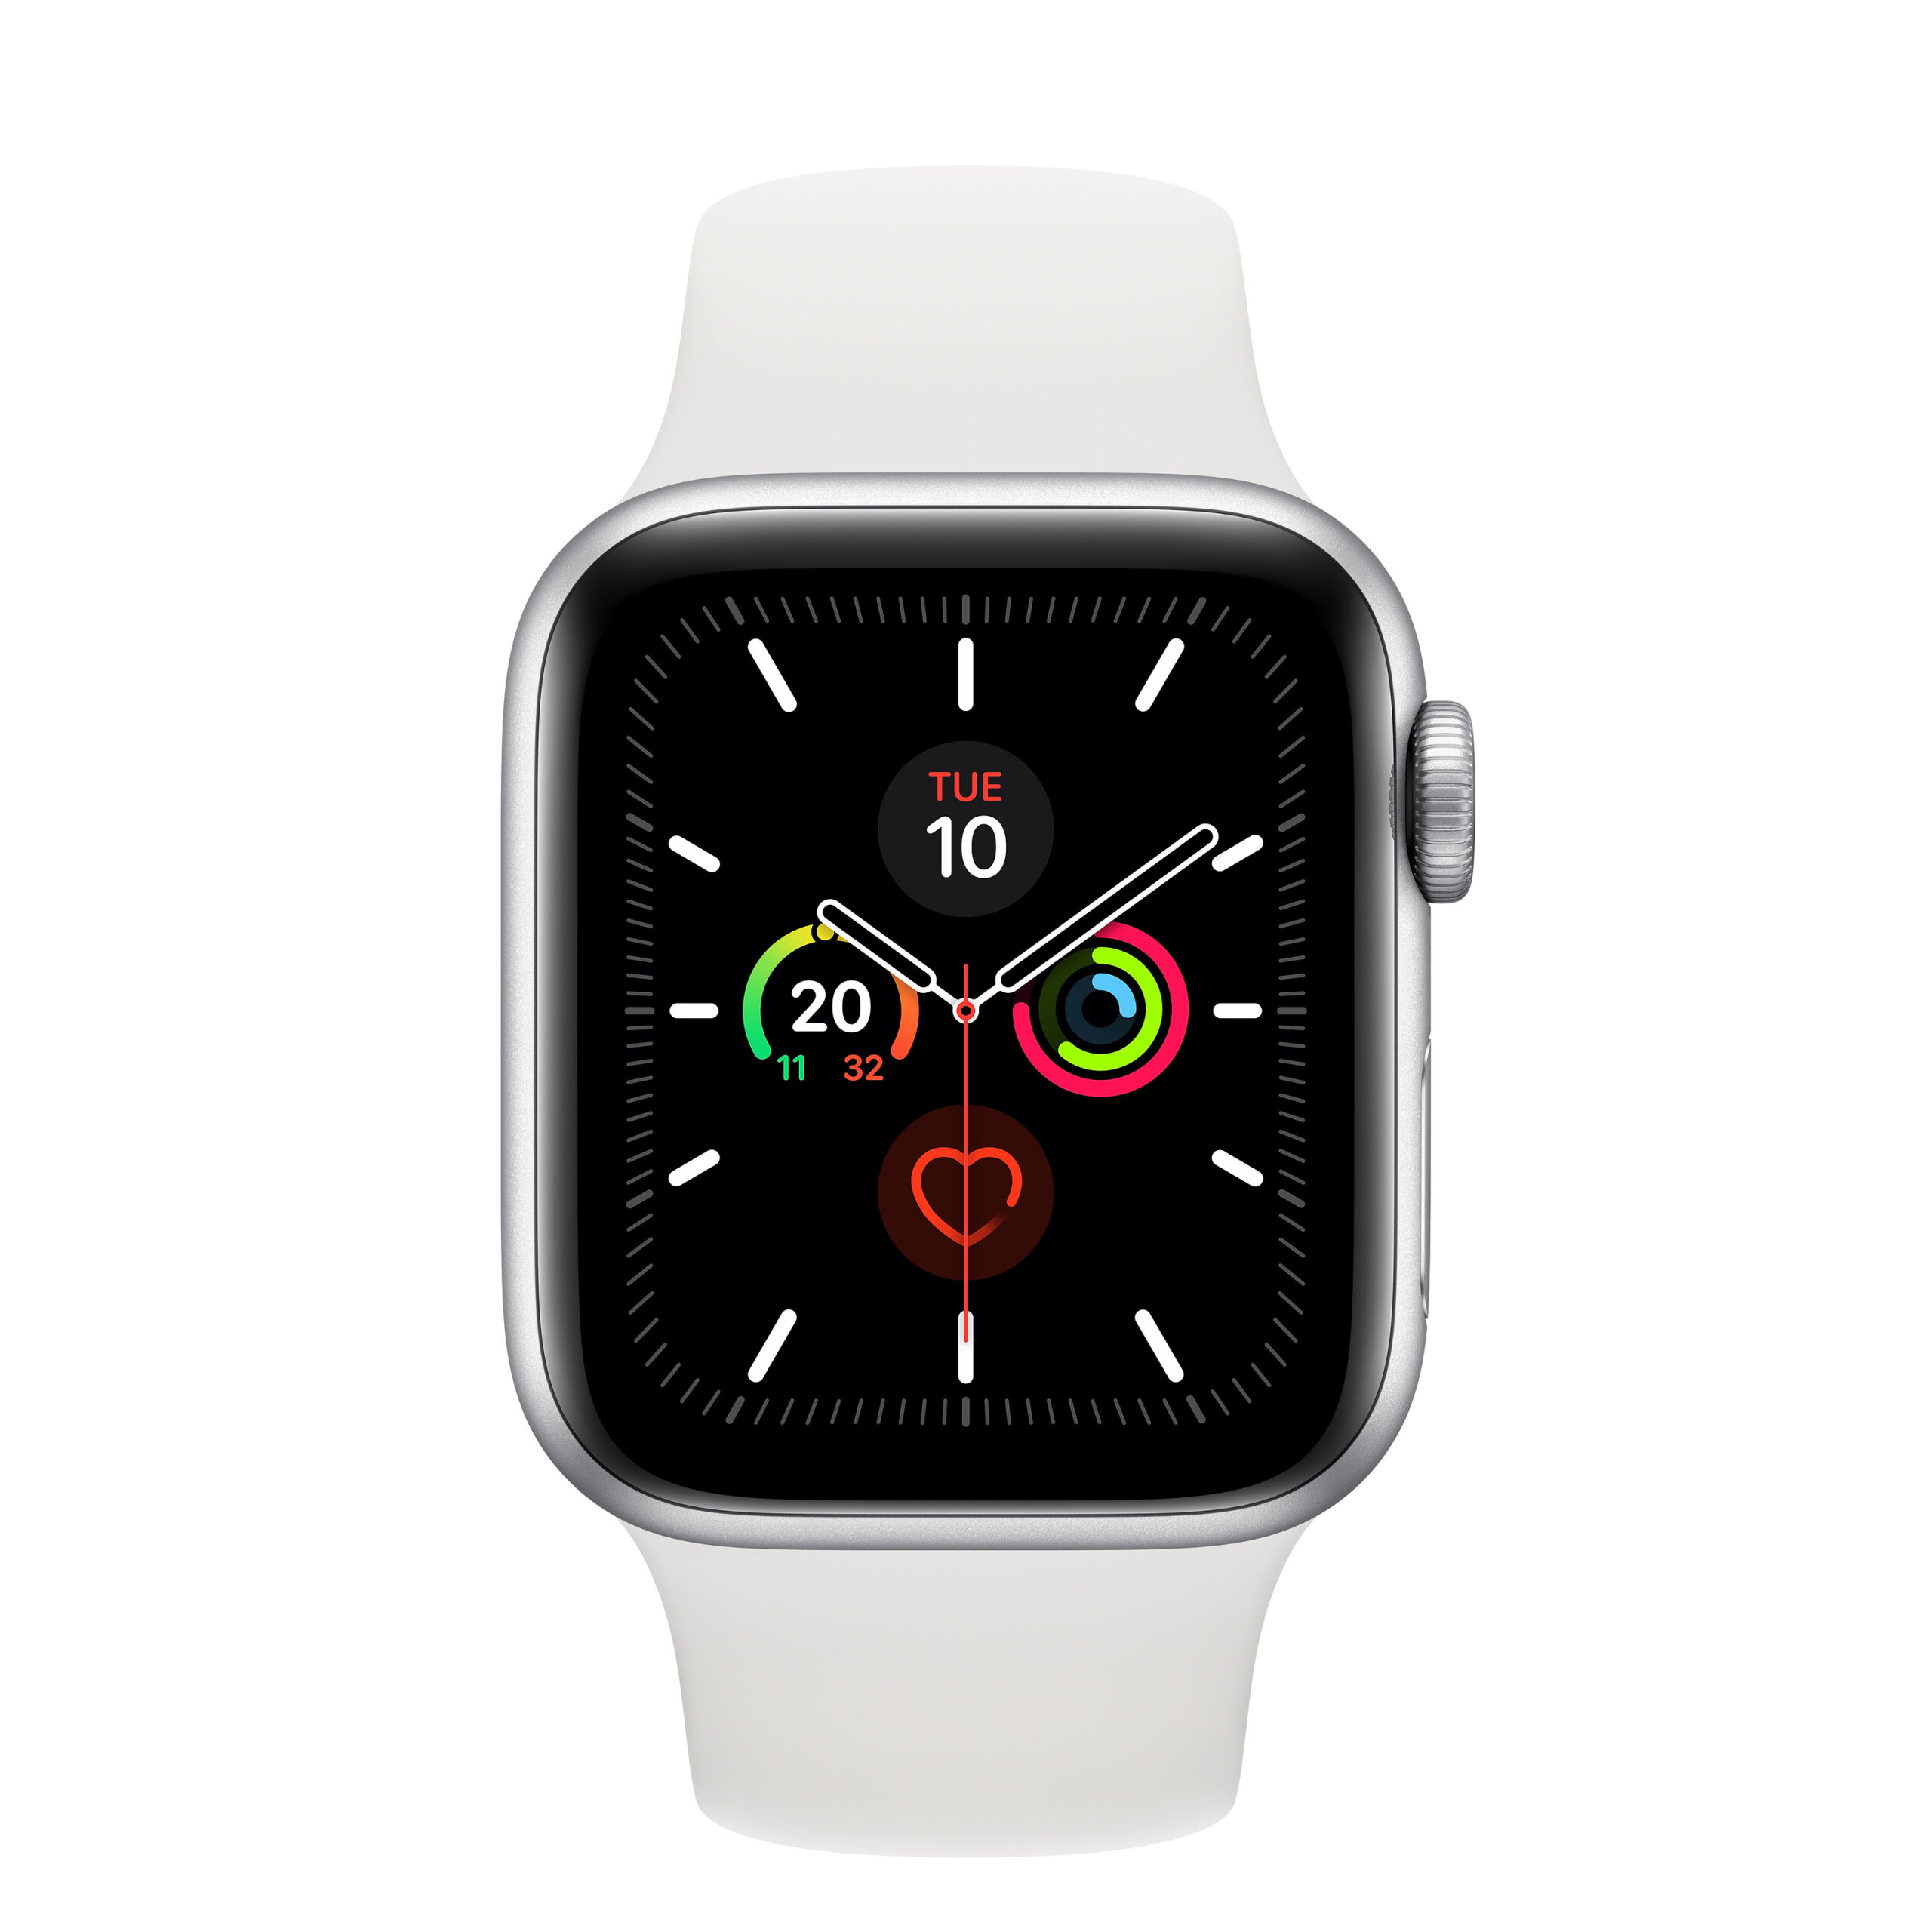 MWV62LL/A - $286 - Apple Watch Series 5 (GPS Only, 40mm, Silver Aluminum, White Sport Band)